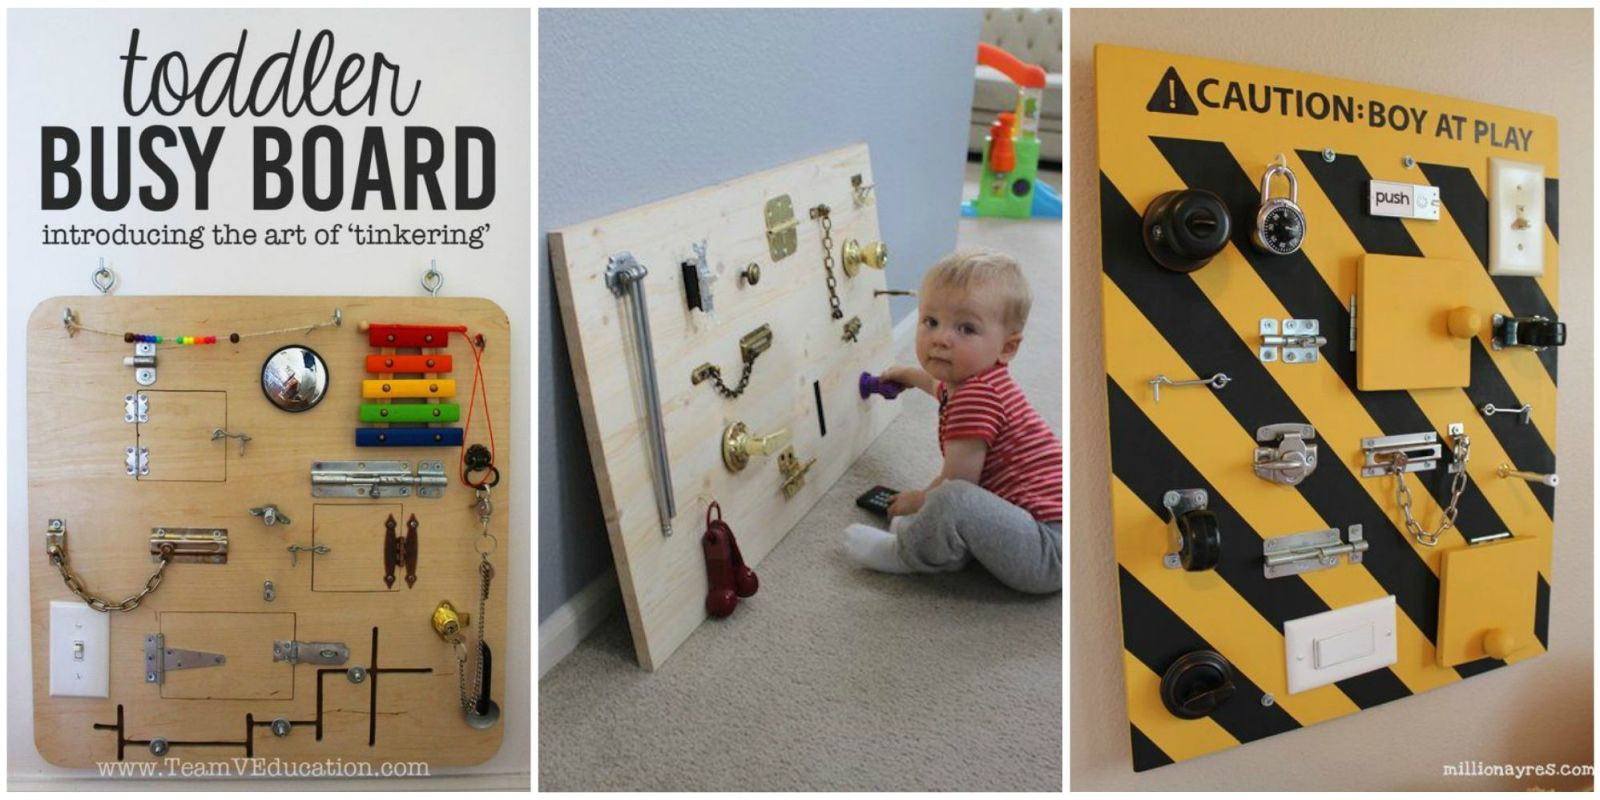 Toddler Busy Board DIY
 This DIY Toddler Busy Board Will Keep Little es Busy for